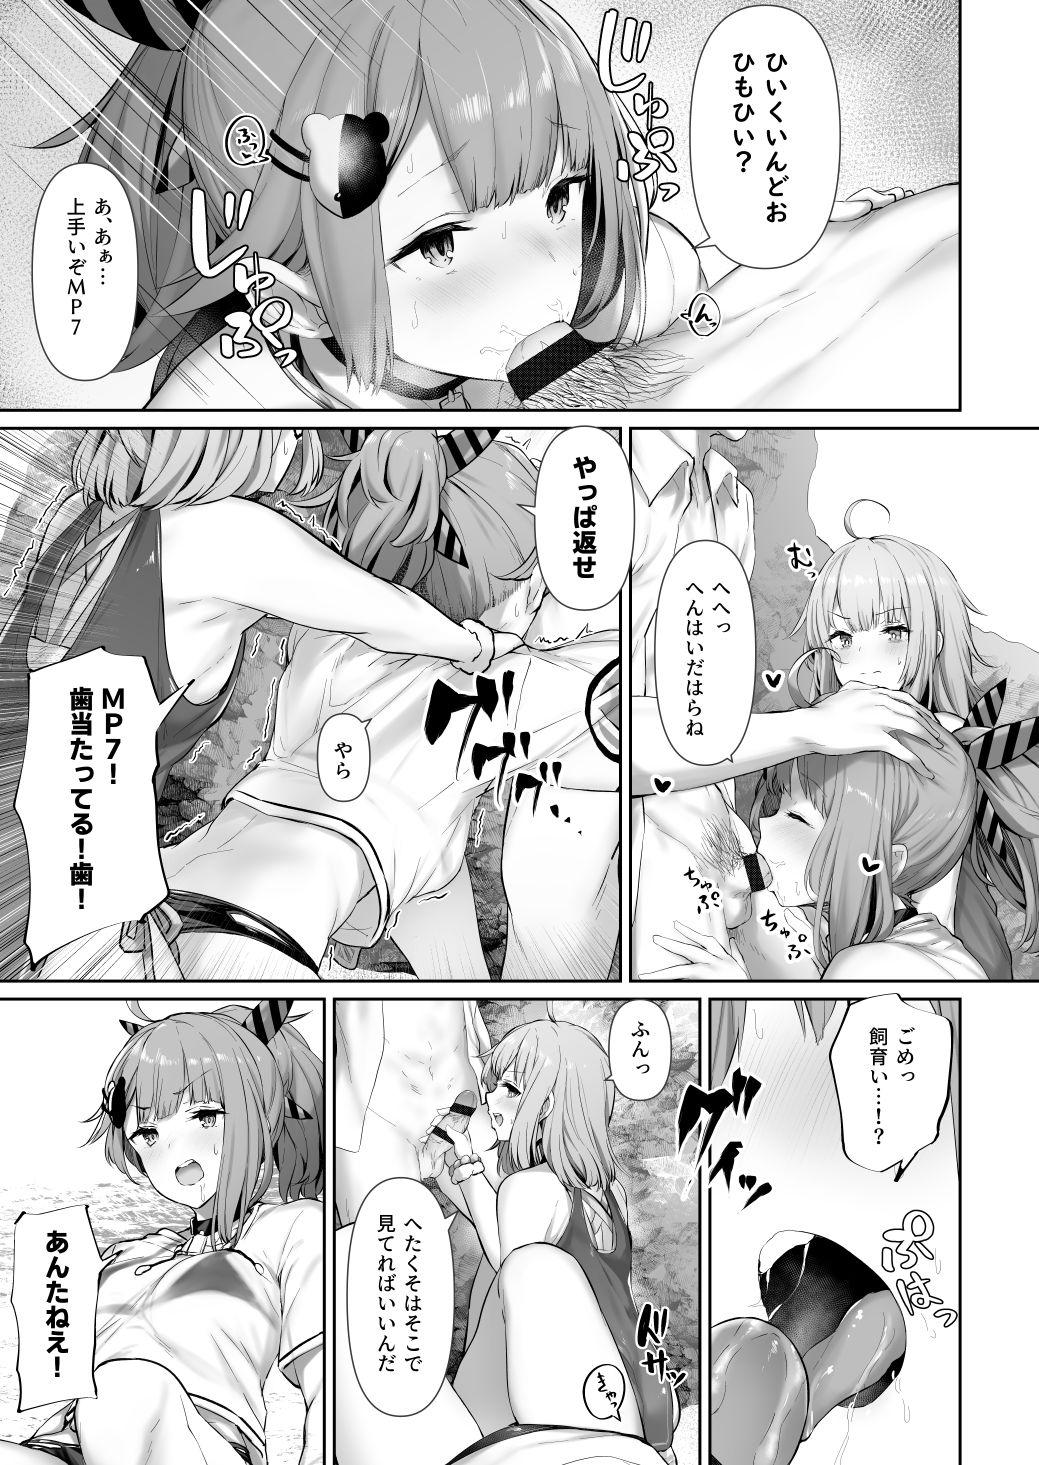 English MP7 and AA-12 - Girls frontline Huge Dick - Page 3